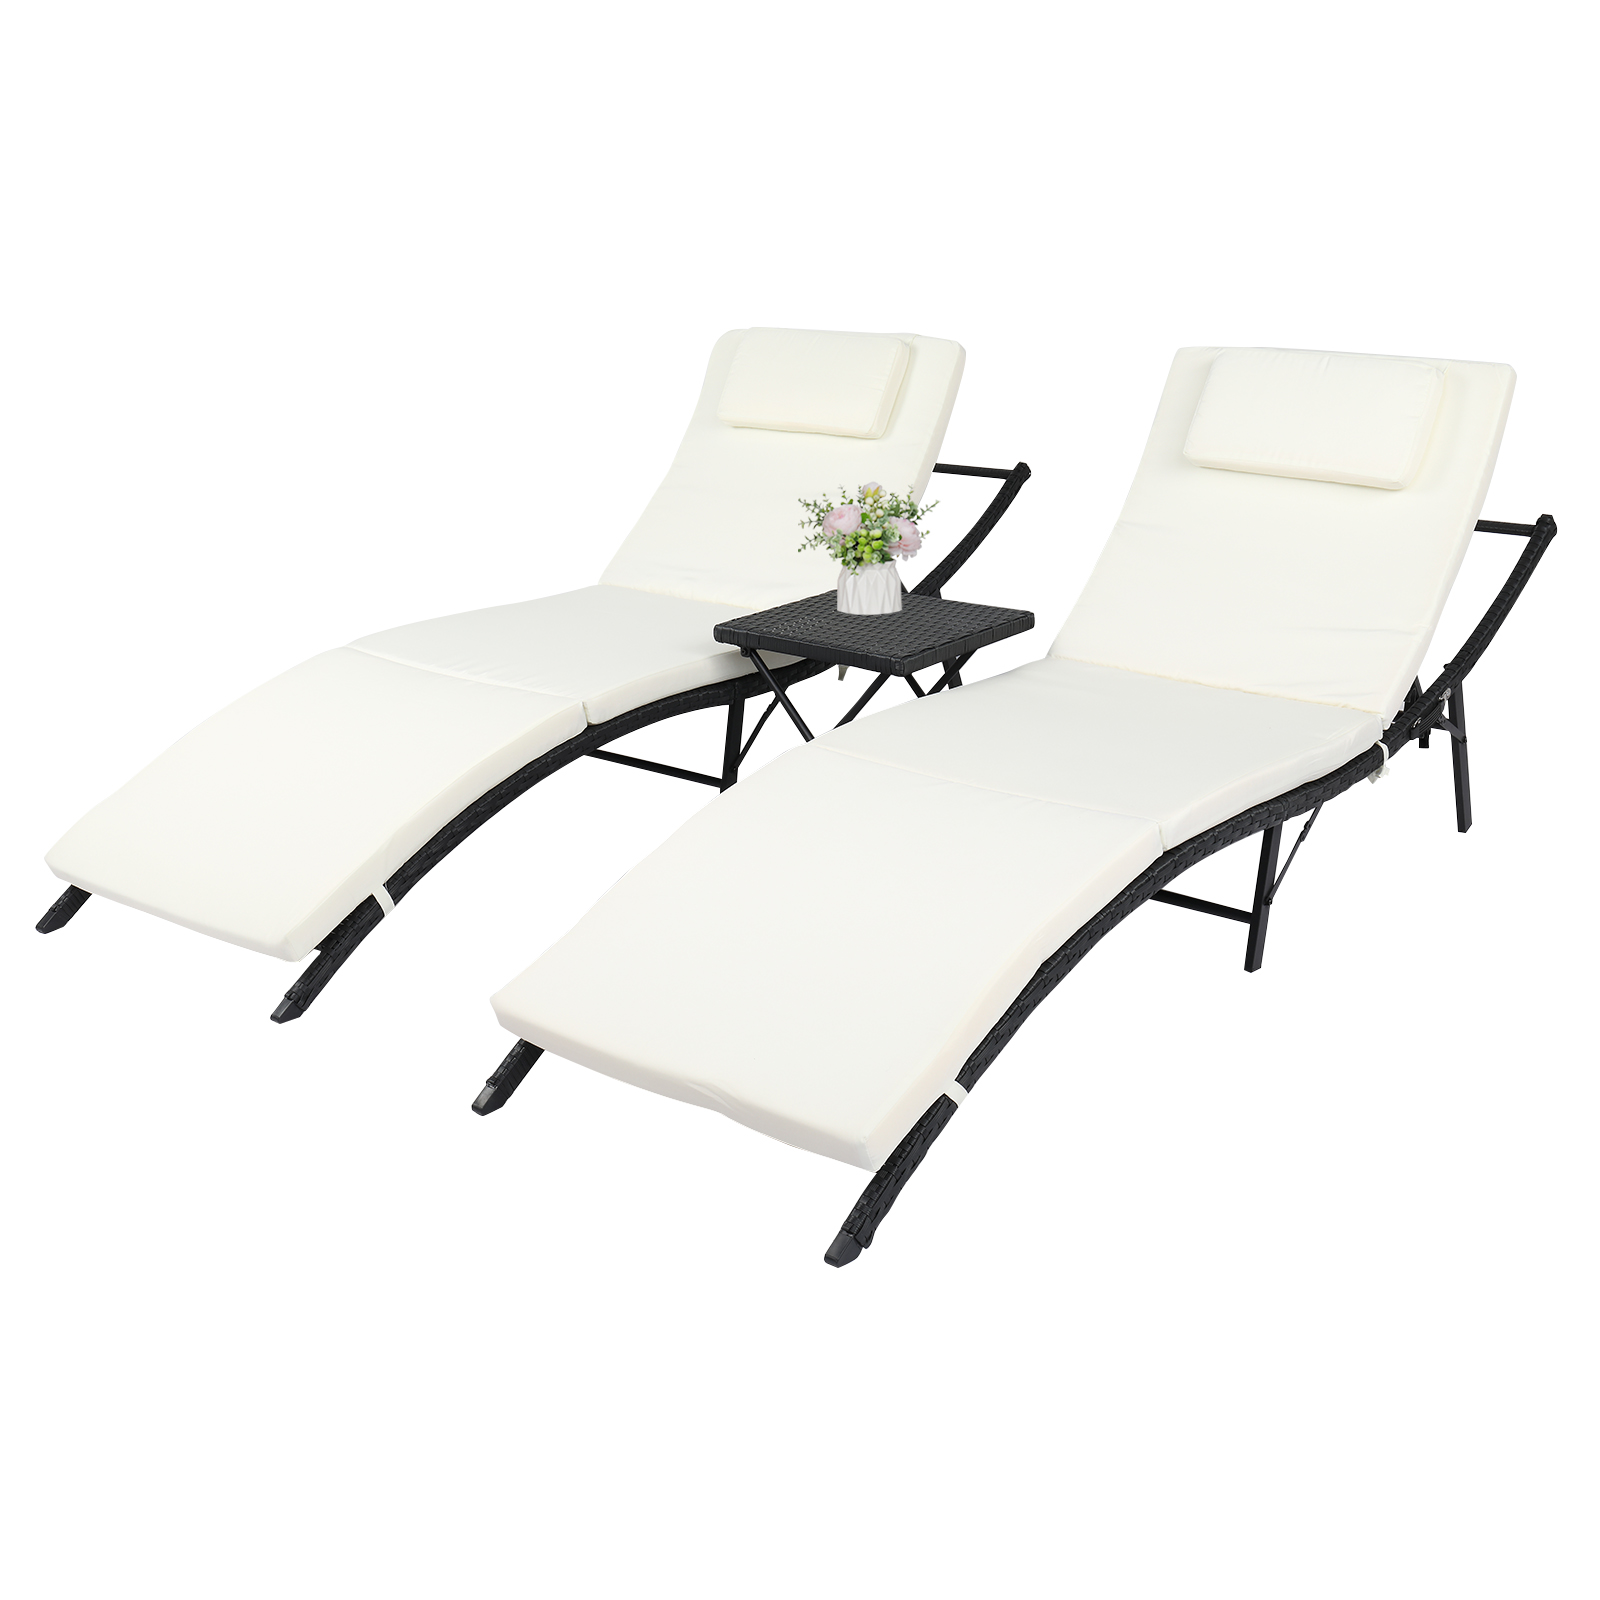 3 Piece Patio Chaise Lounge Chair Set, Outdoor Adjustable Folding Lounge Chair Set with 5 Positions, Patio Furniture PE Rattan Chaise Lounge Set with Folding Table and Beige Cushion, Black, J2045 - image 2 of 20